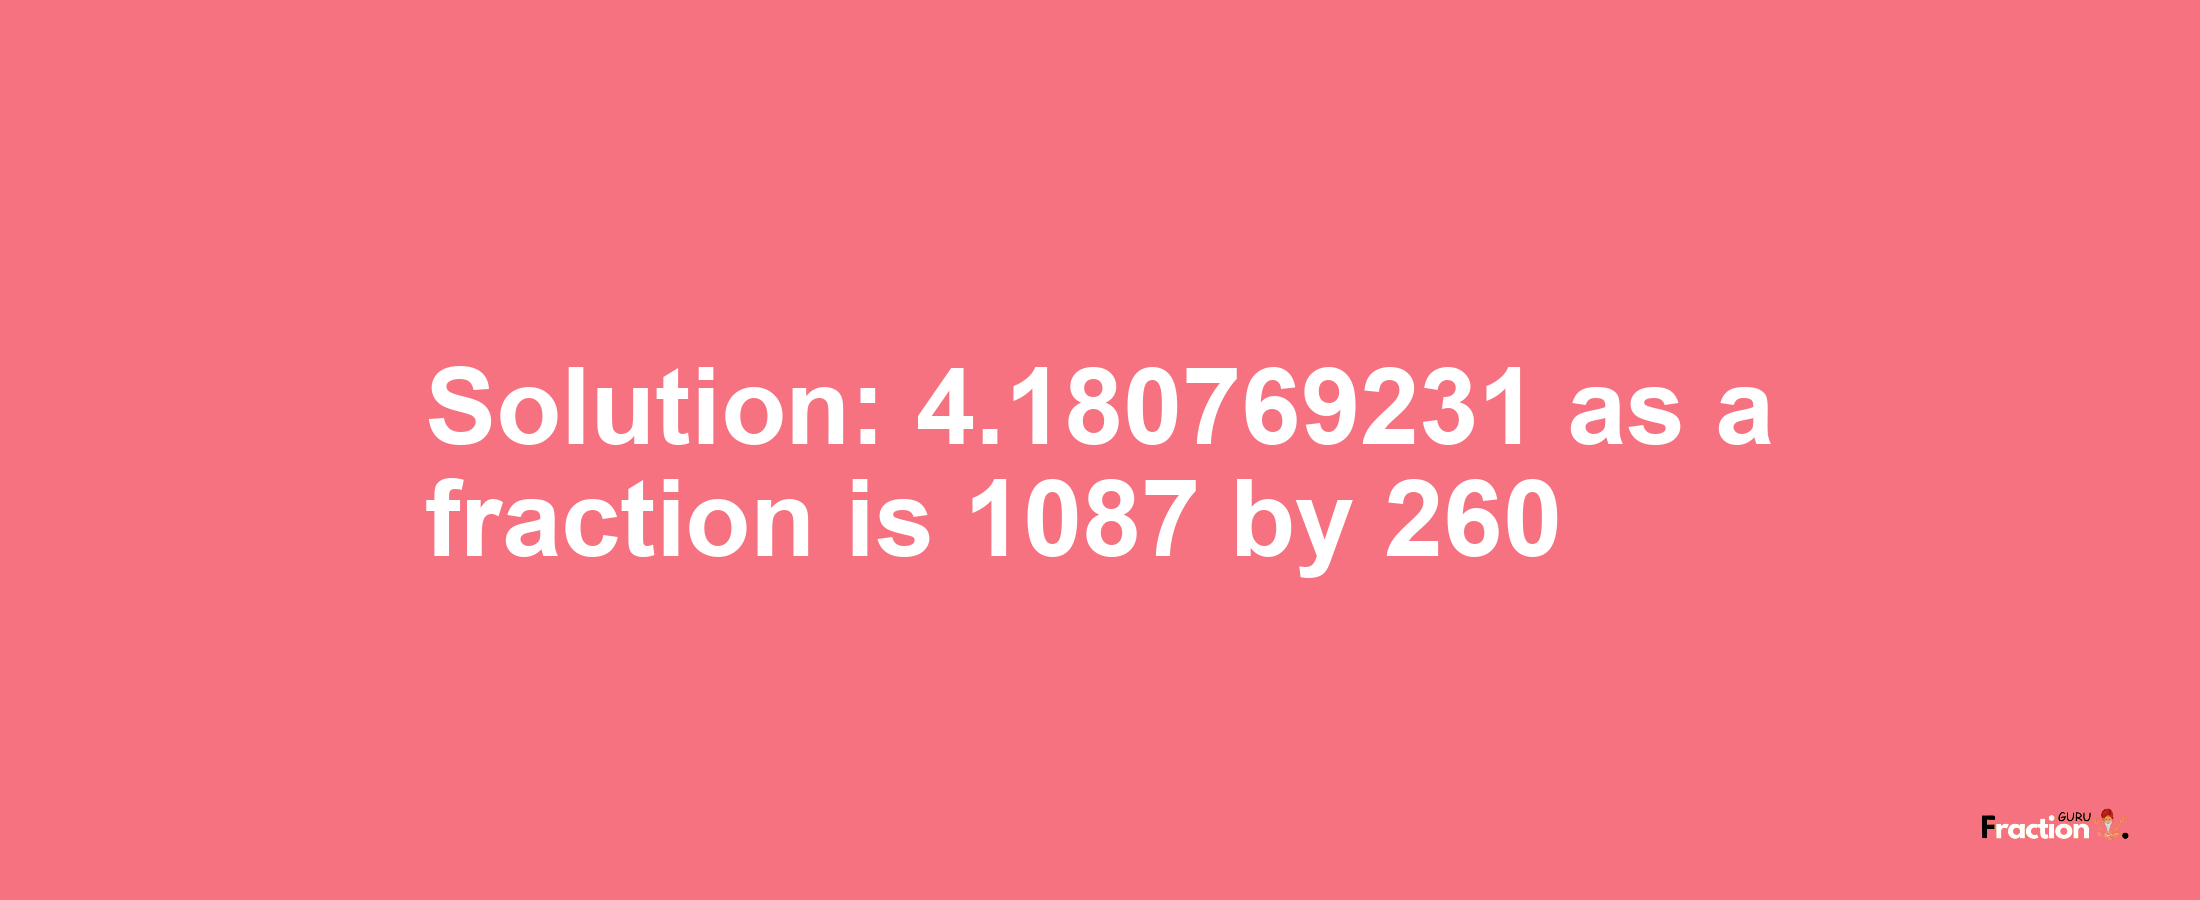 Solution:4.180769231 as a fraction is 1087/260